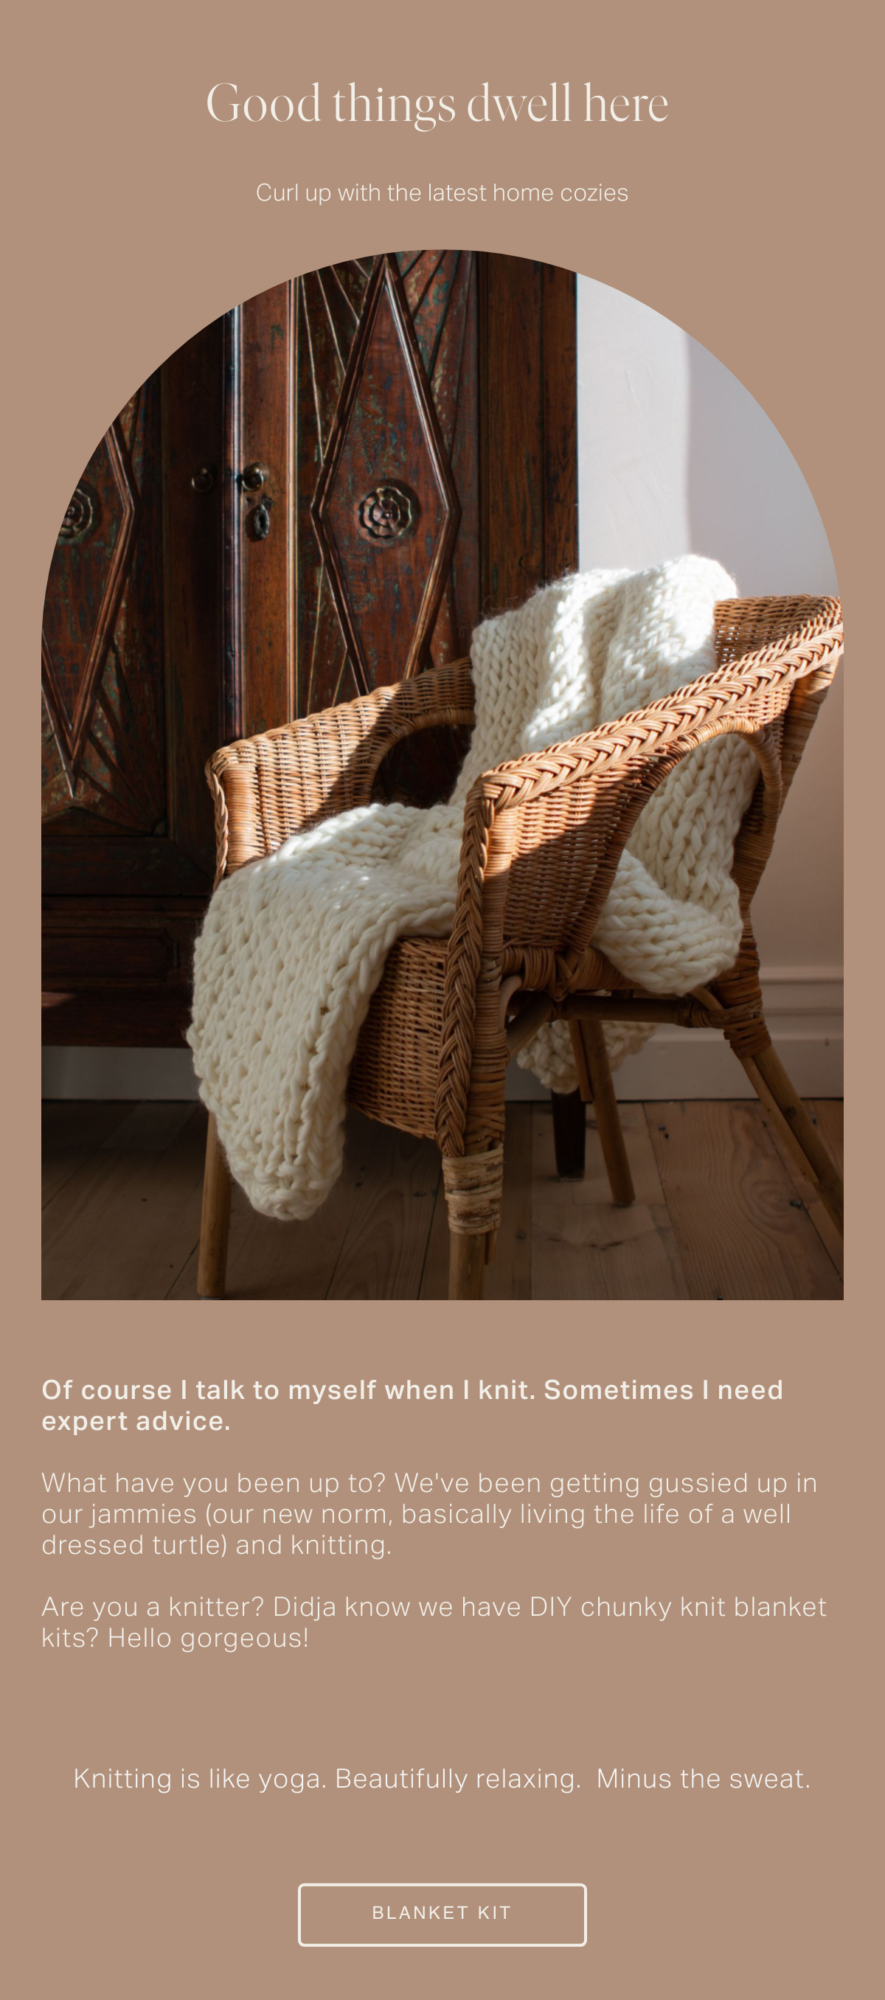 Shop knit kits : everything you need to make a chunky wool blanket....wool, knitting needles, and knit pattern  | Design The Life You Want To Live® lynneknowlton.com